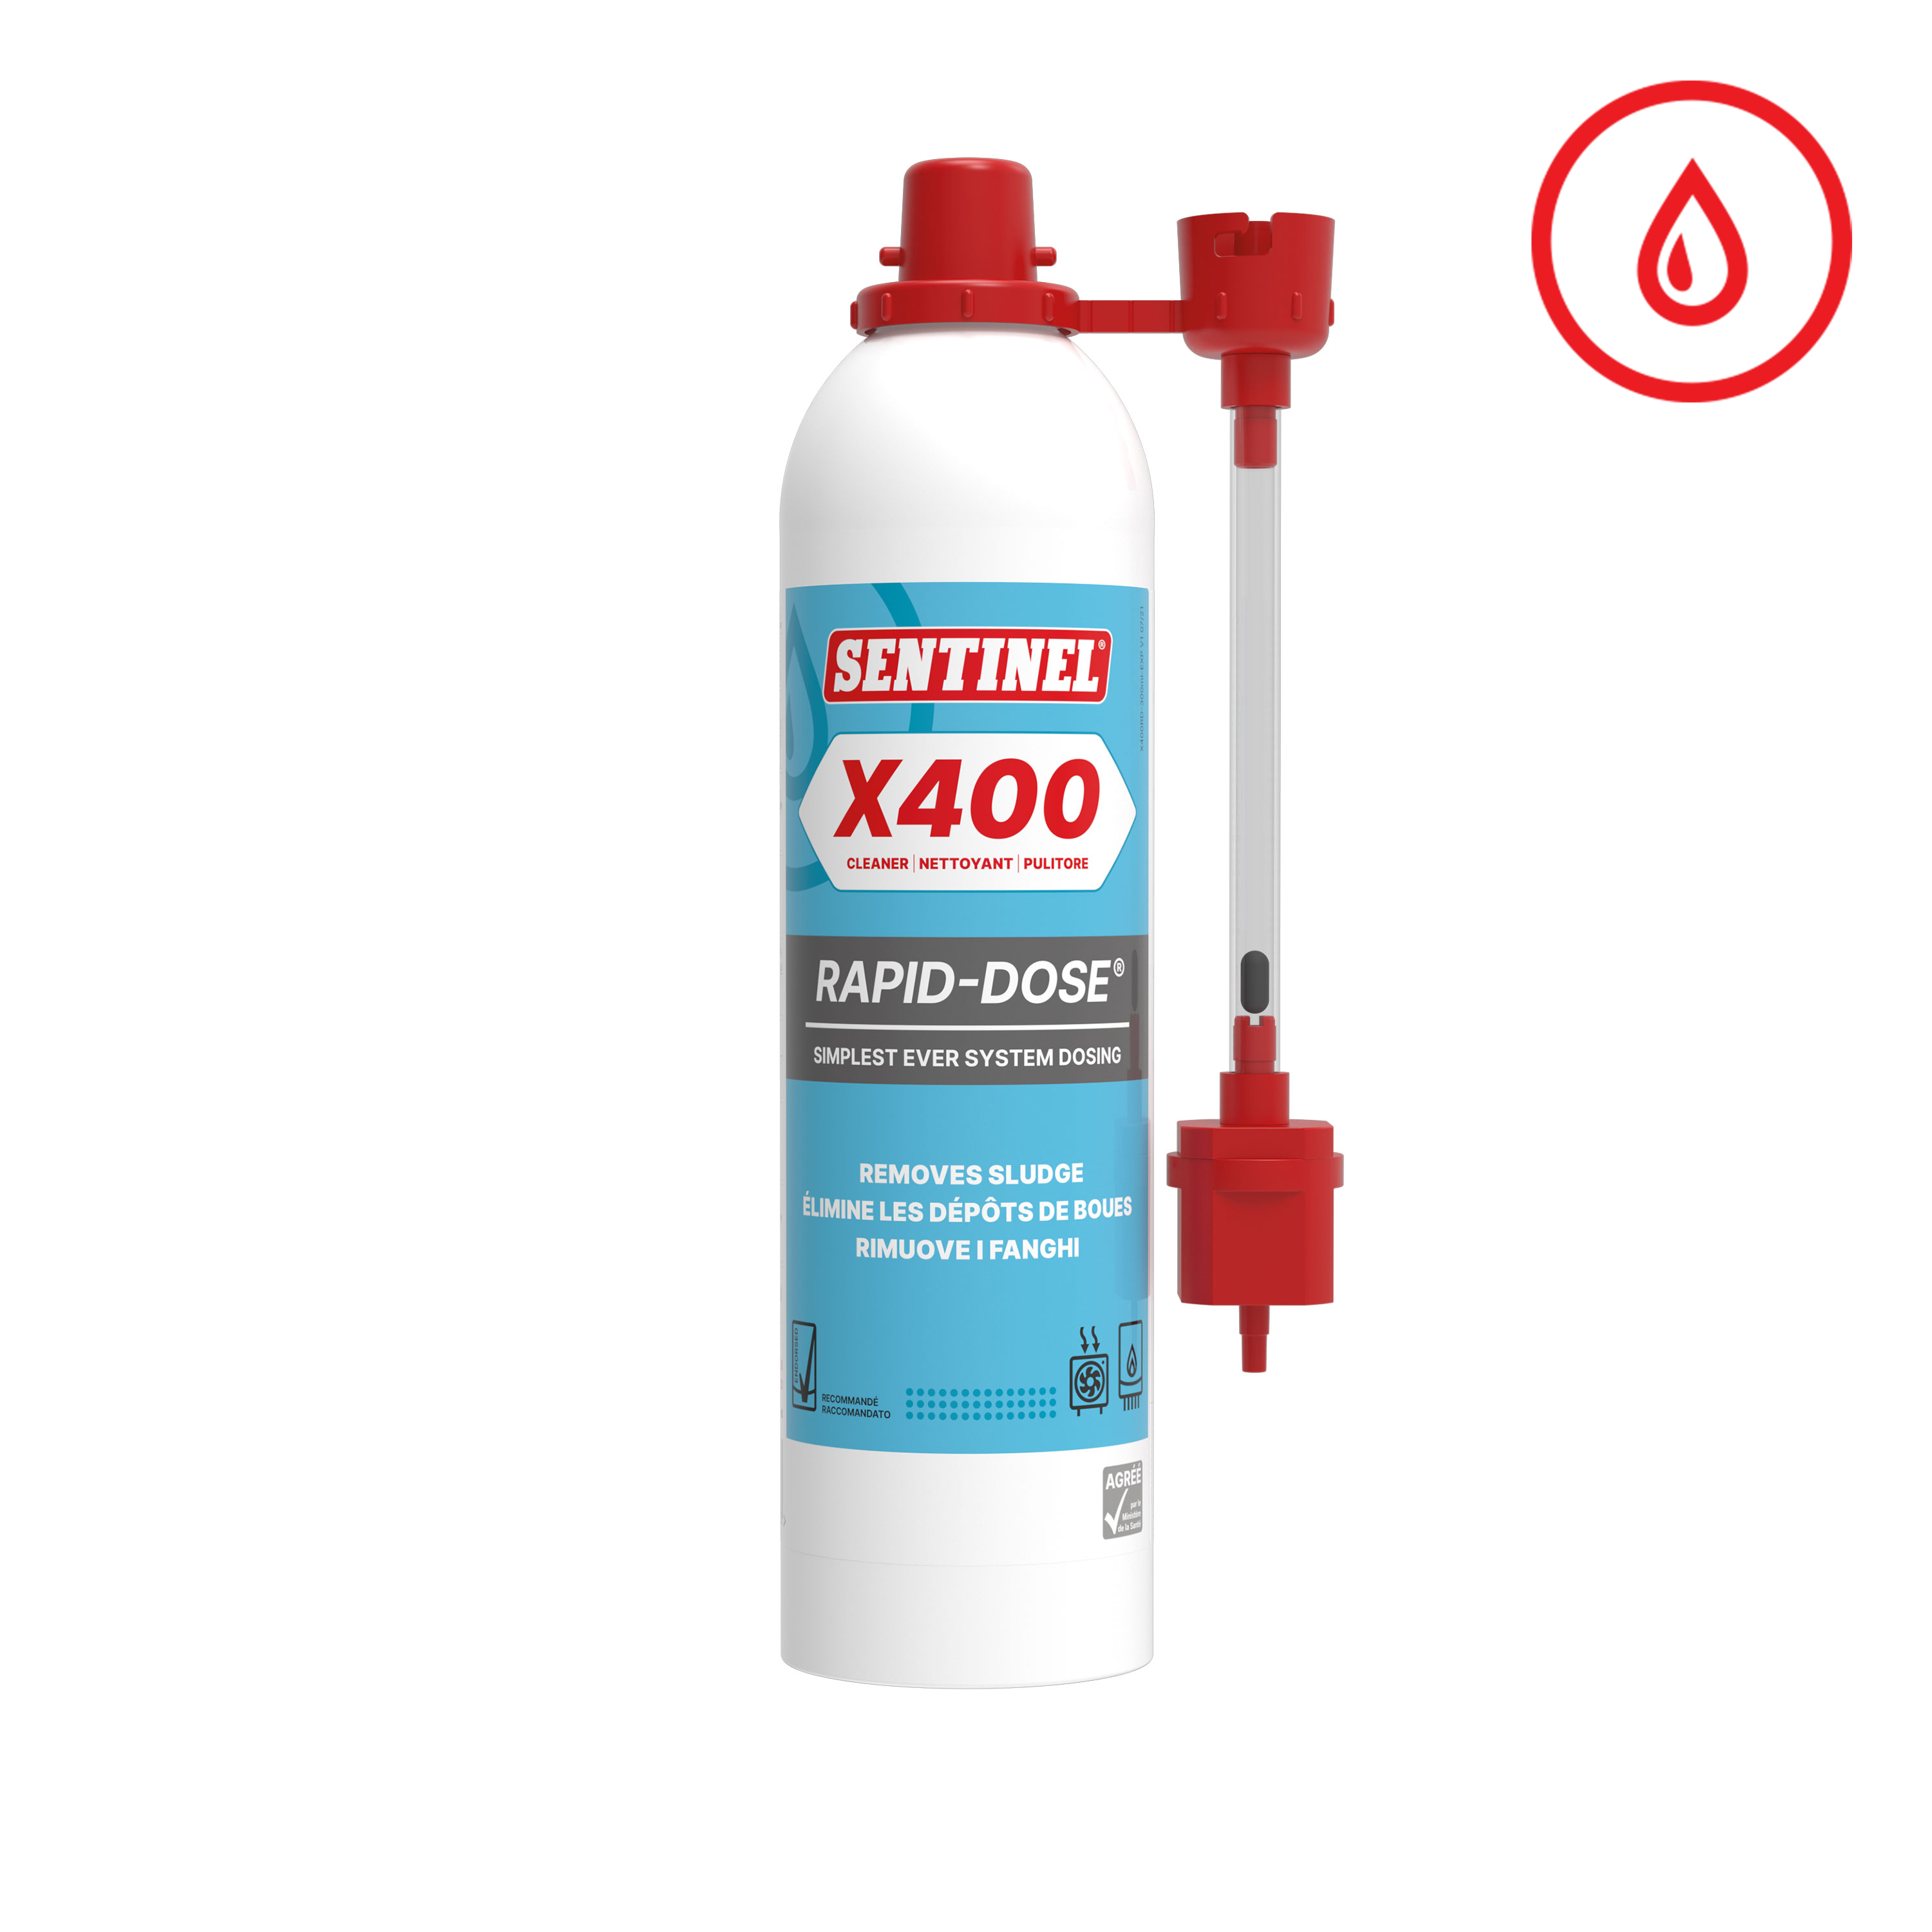 X400 Rapid-Dose Cleaner